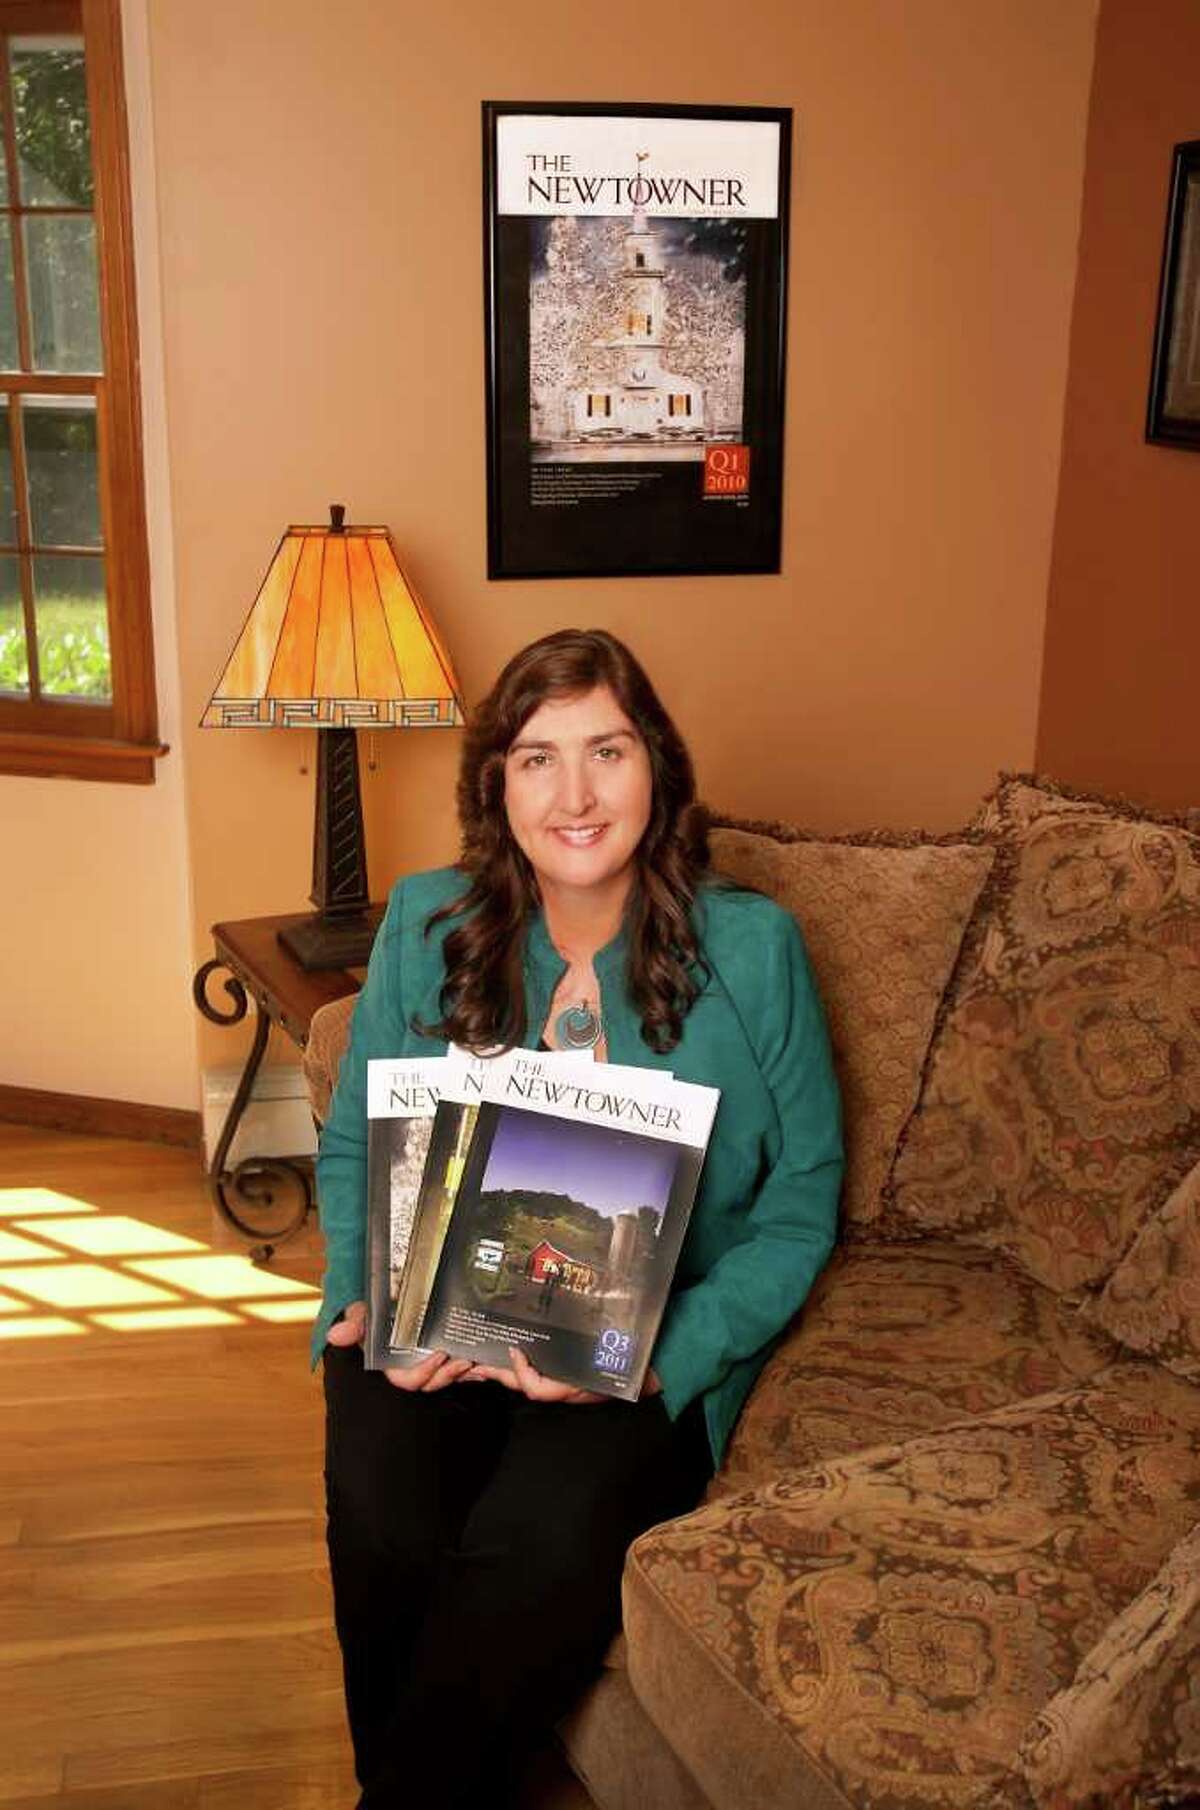 Georgia Monaghan is the founder and editor-in-chief of The Newtowner.